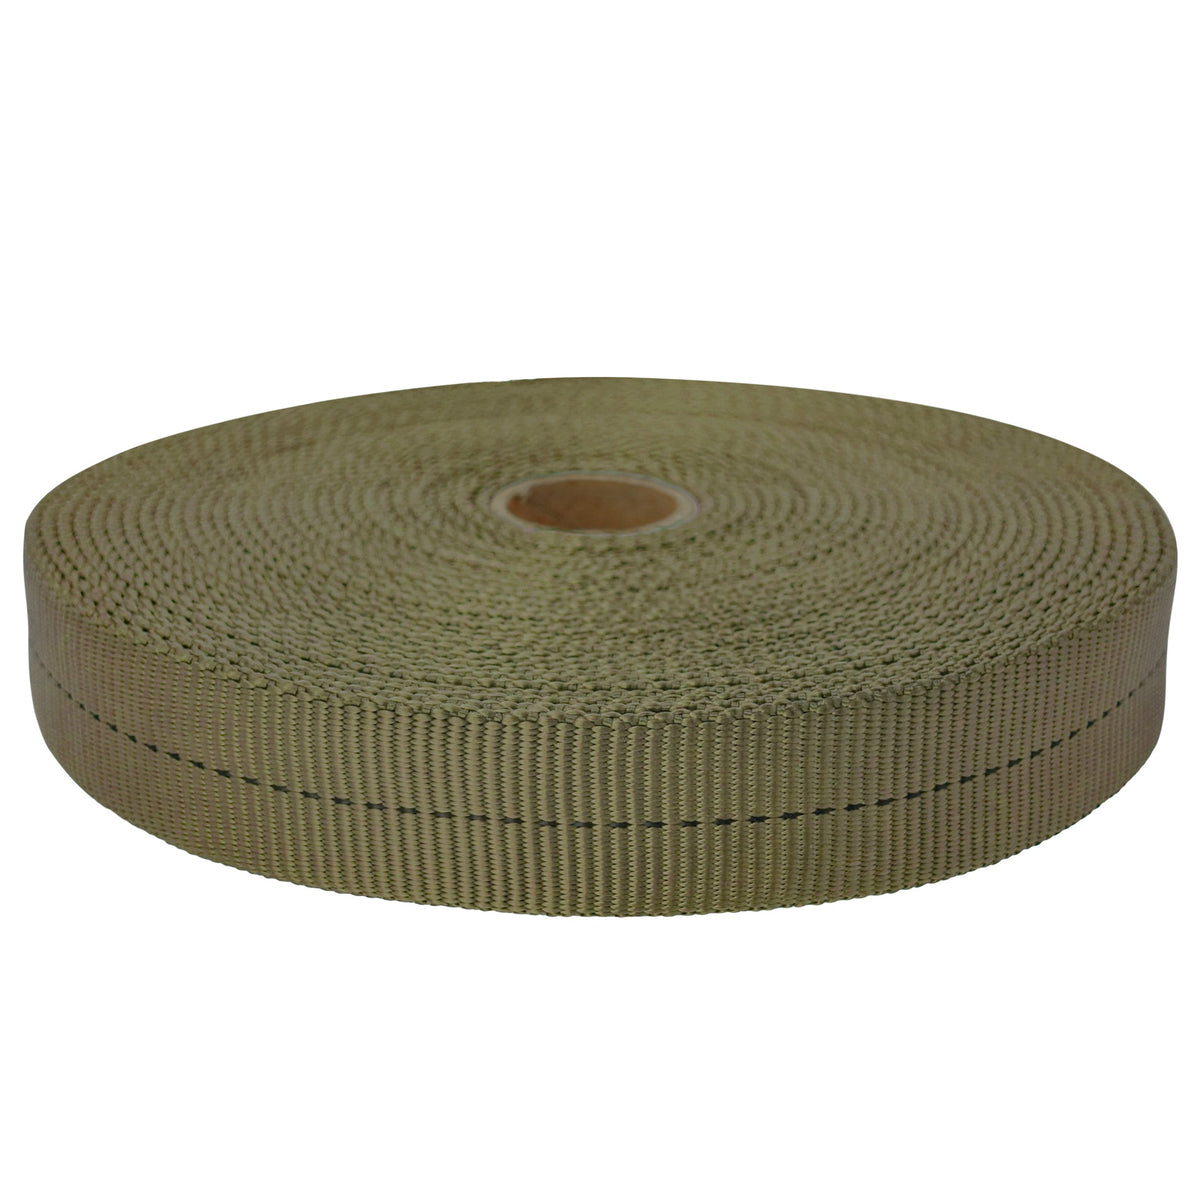 Mil-w-5625 Tubular Nylon Webbing 1 Inch-wide Olive Drab Sold In By